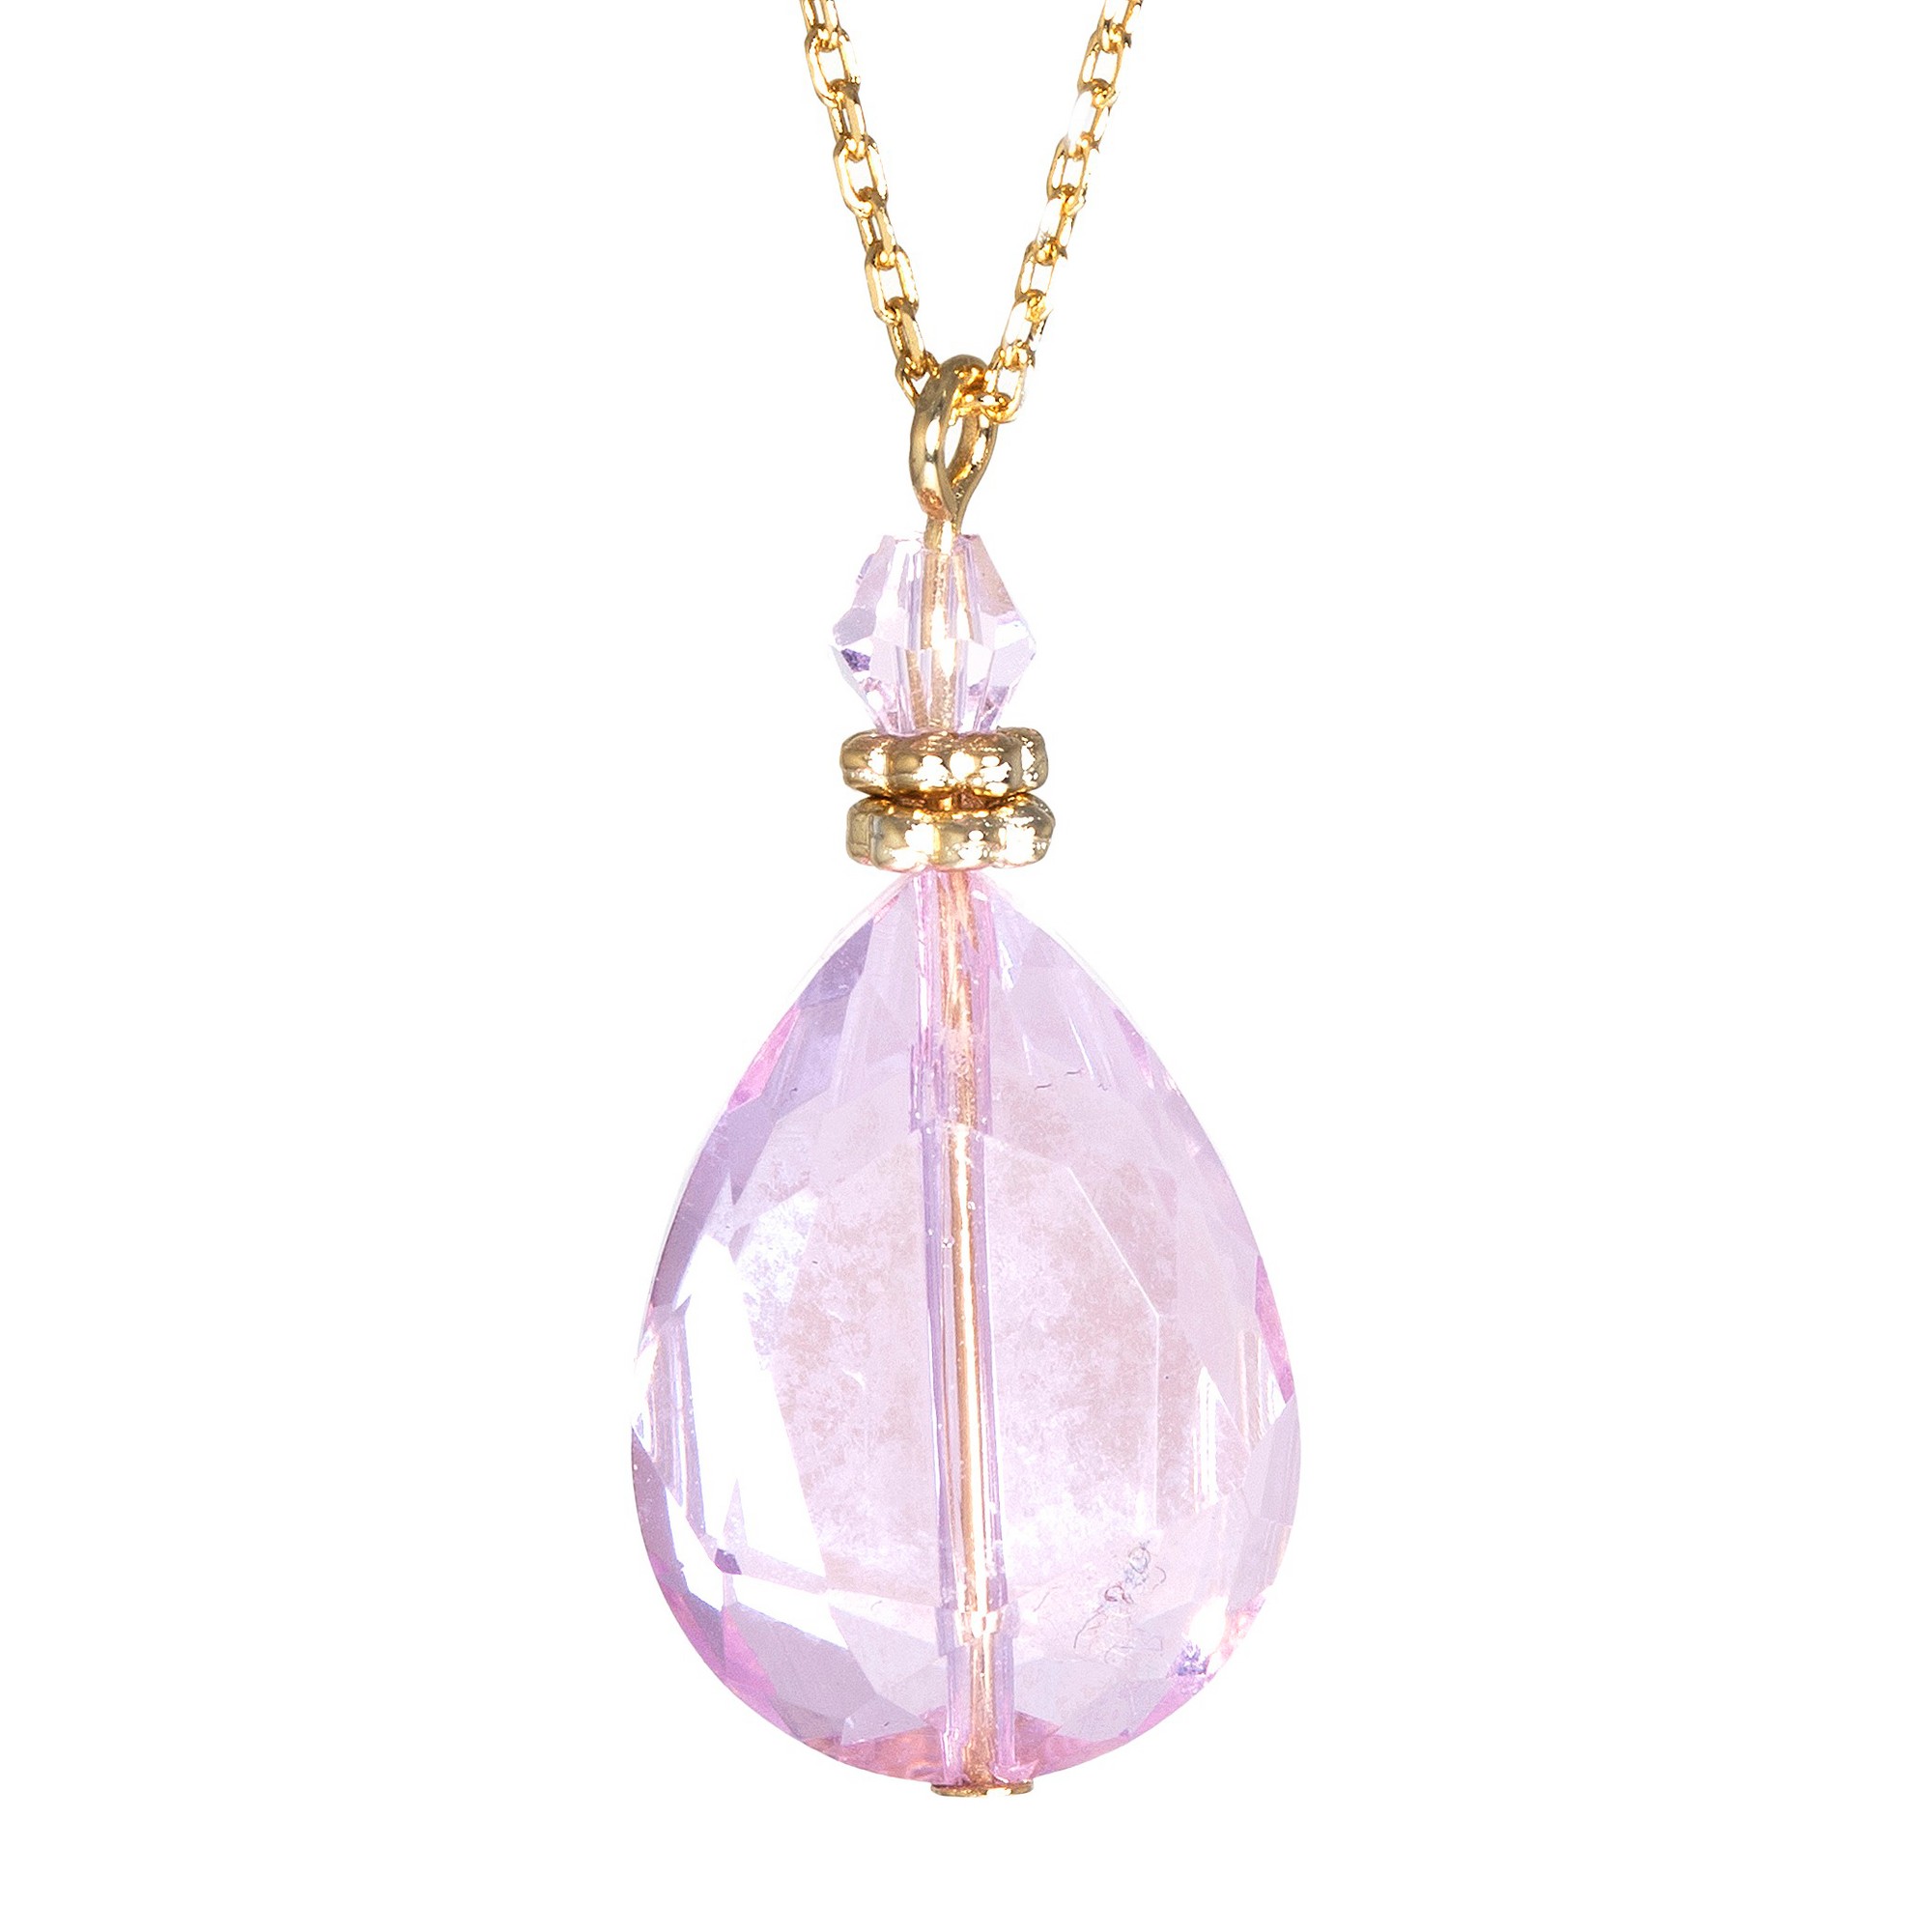 'Gold Over Sterling Silver Necklace with Pink Faceted Crystal - Pink (16''), Gold/Pink/Silver'